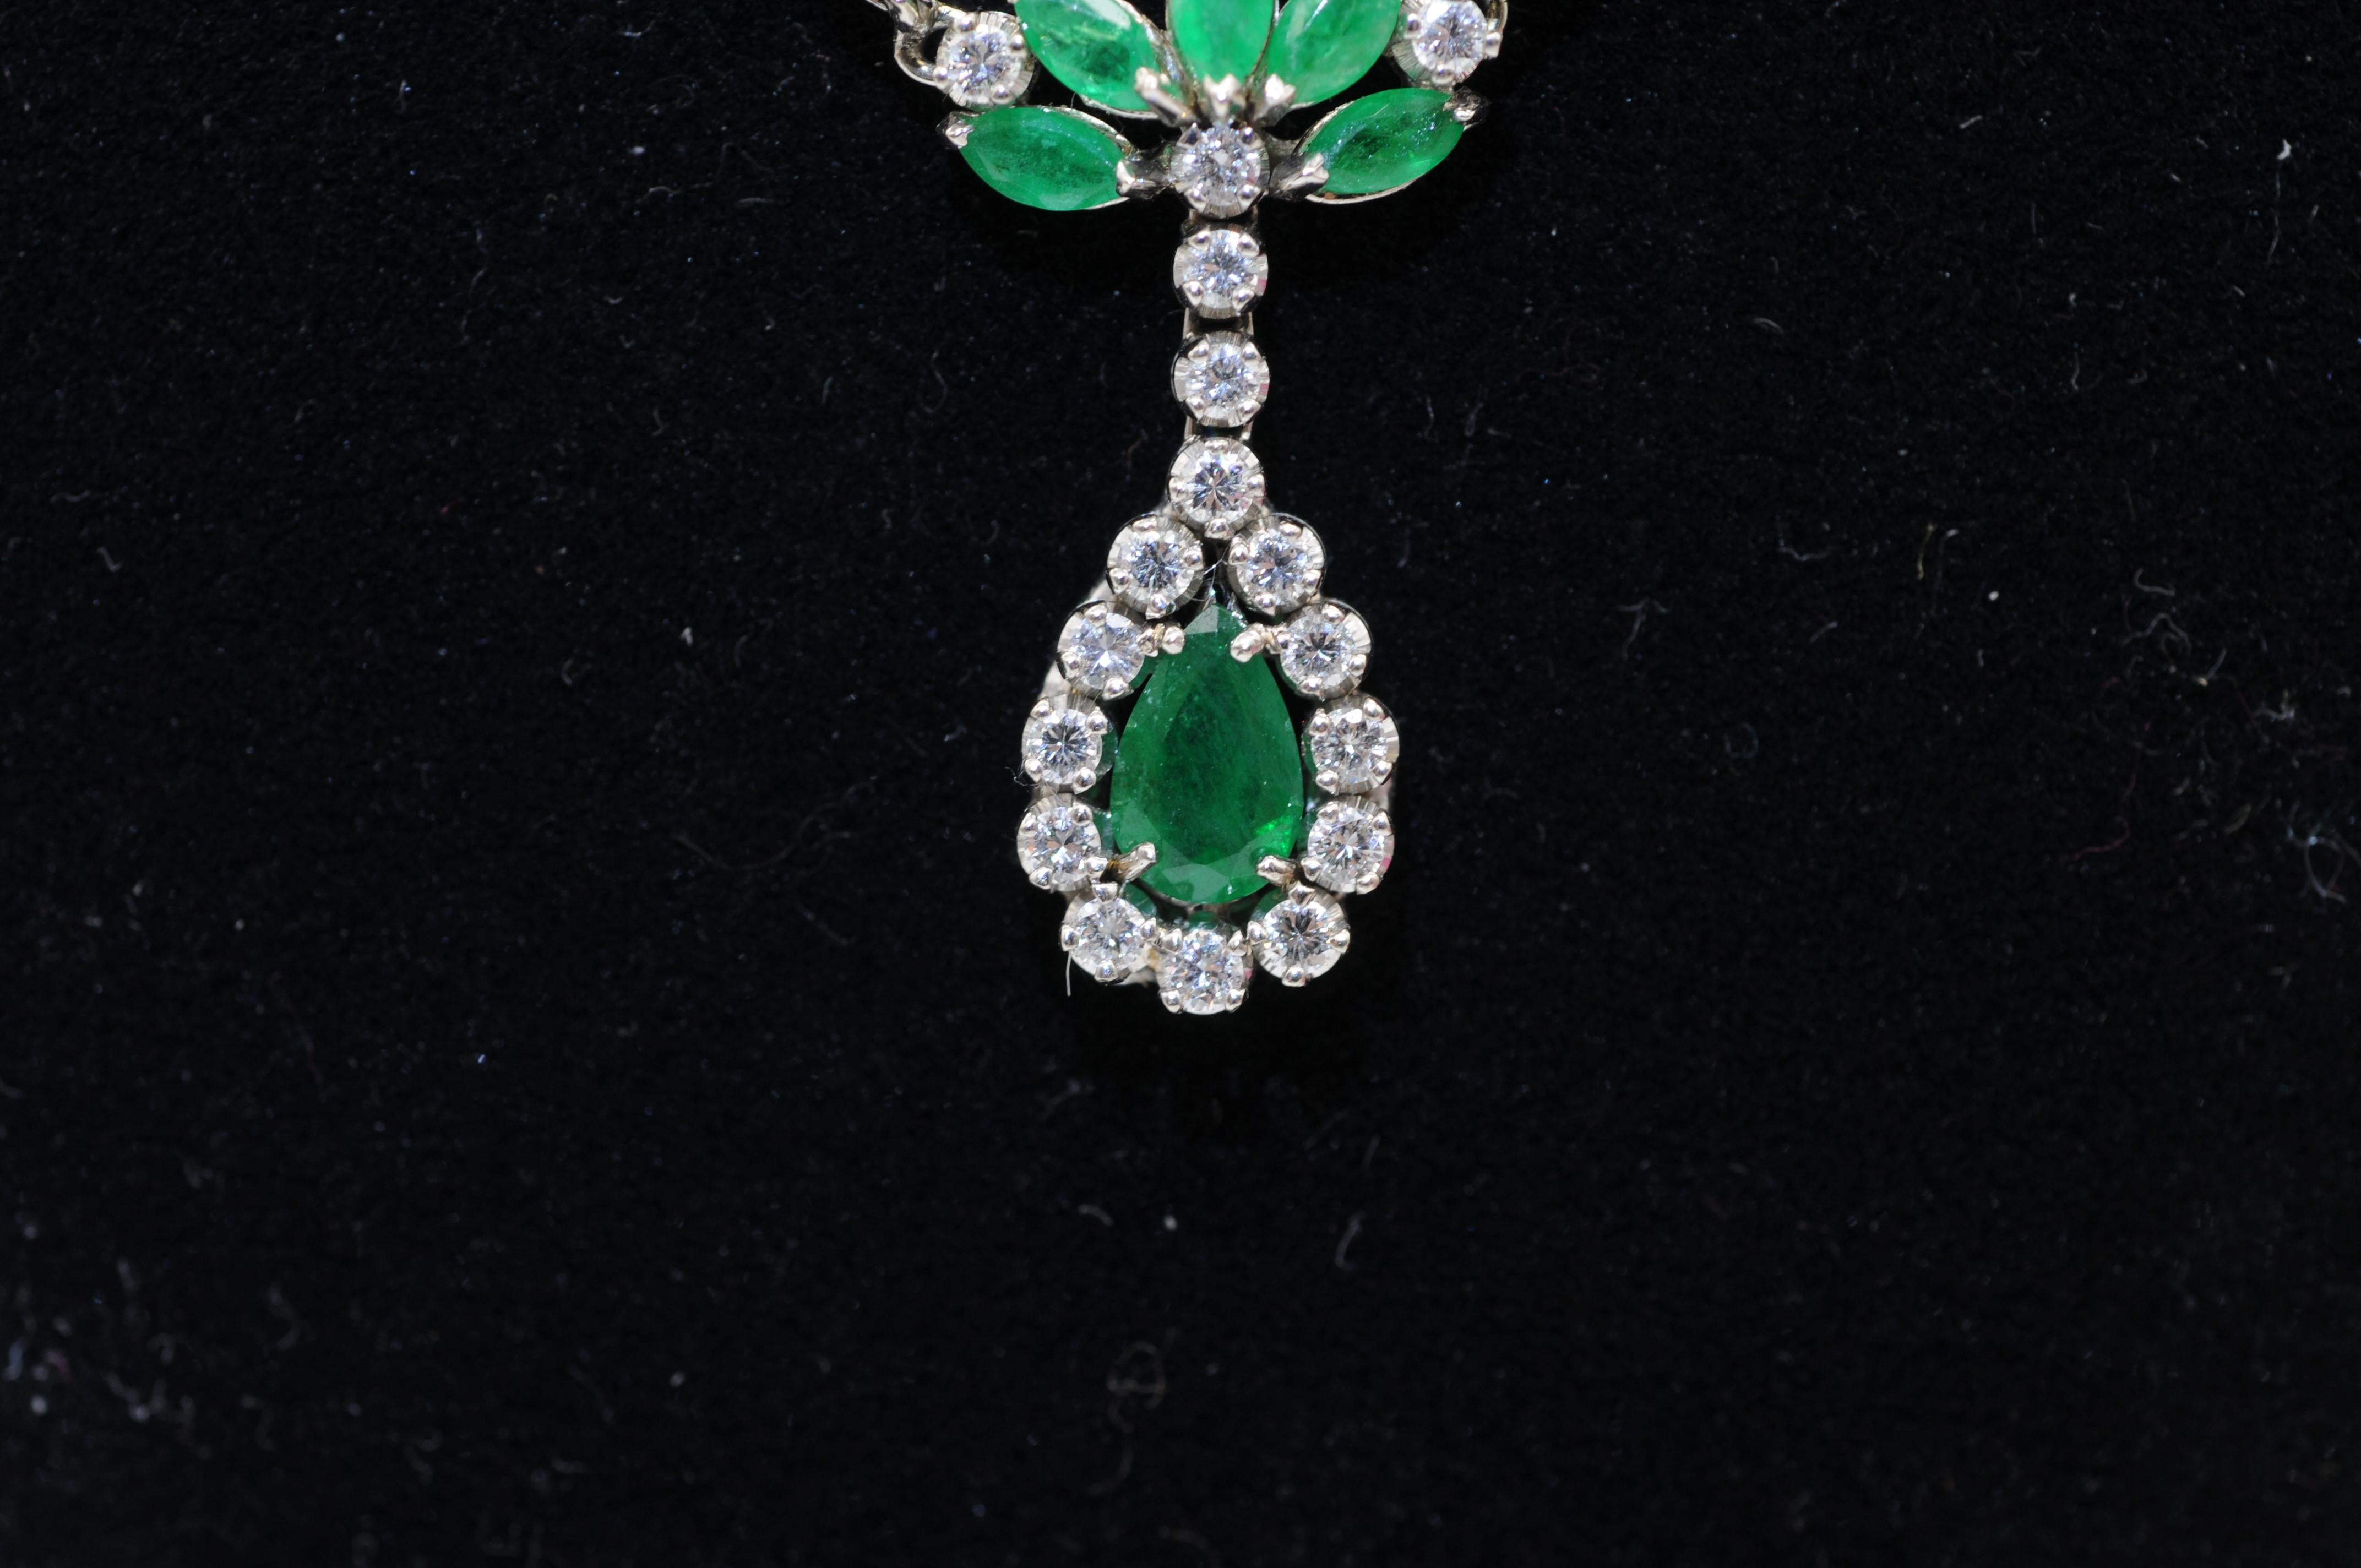 Wonderful Art deco style dreamfull necklace with emeralds and diamonds For Sale 12